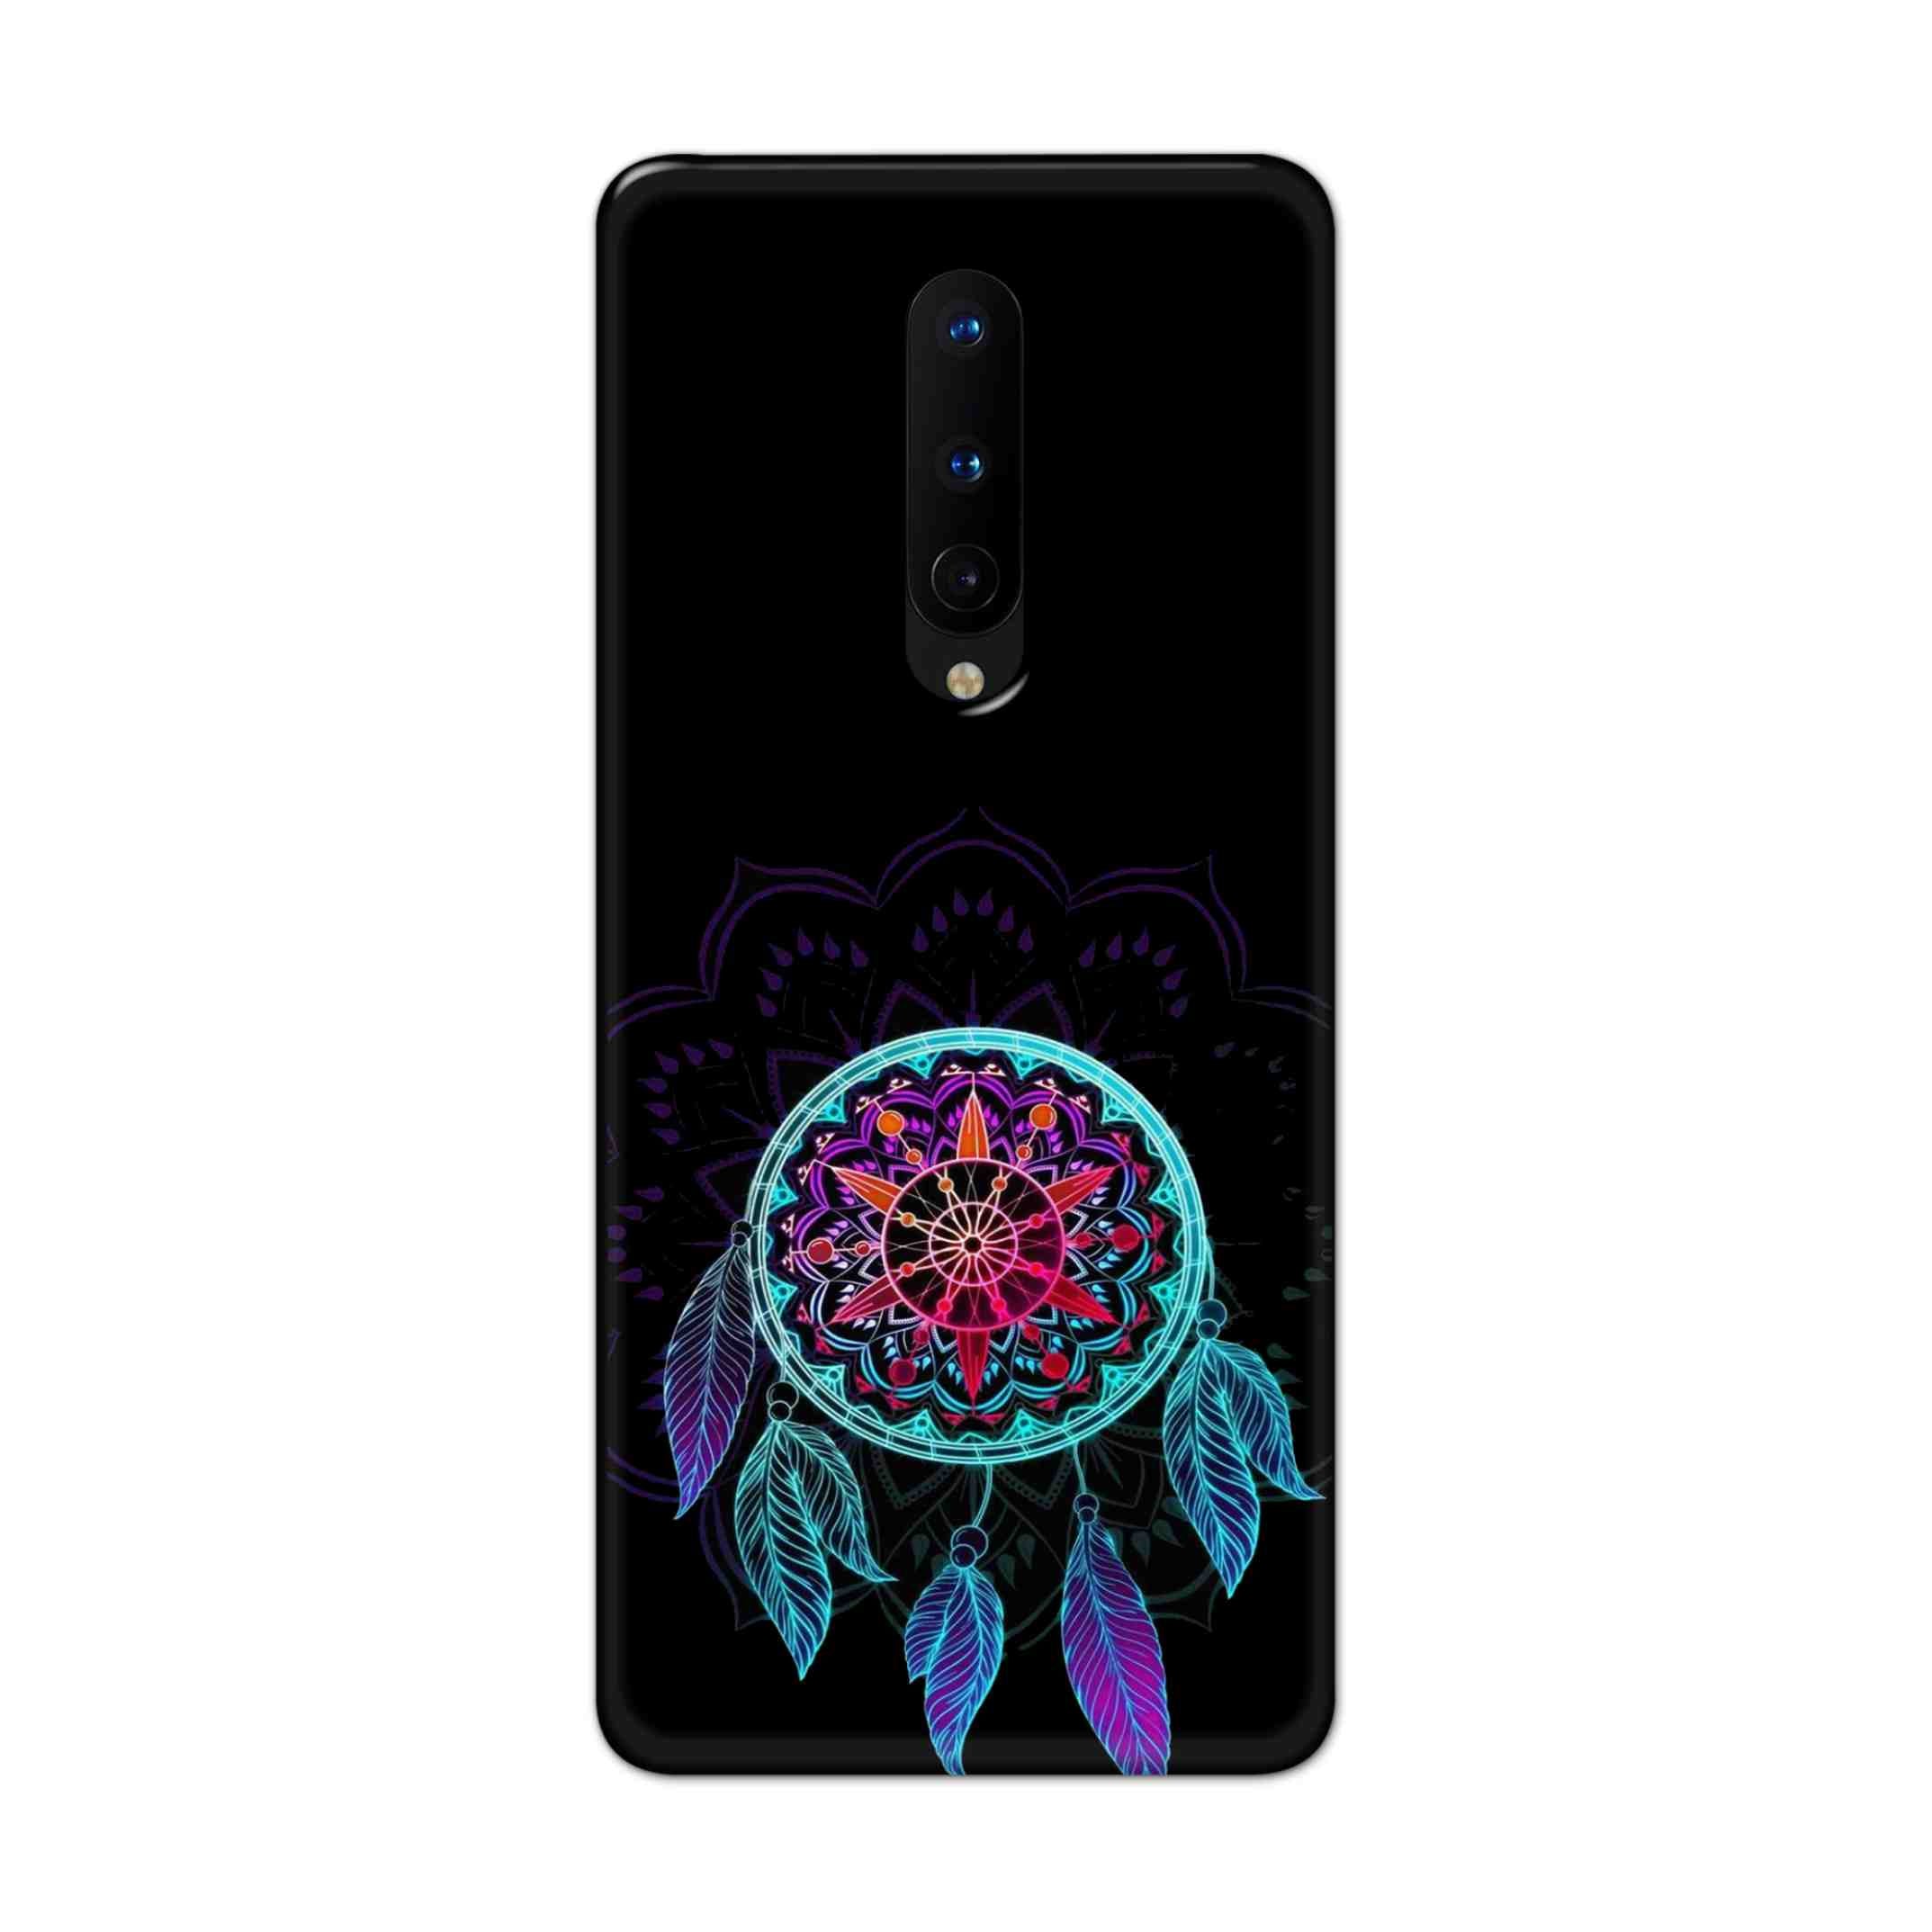 Buy Dream Catcher Hard Back Mobile Phone Case Cover For OnePlus 8 Online